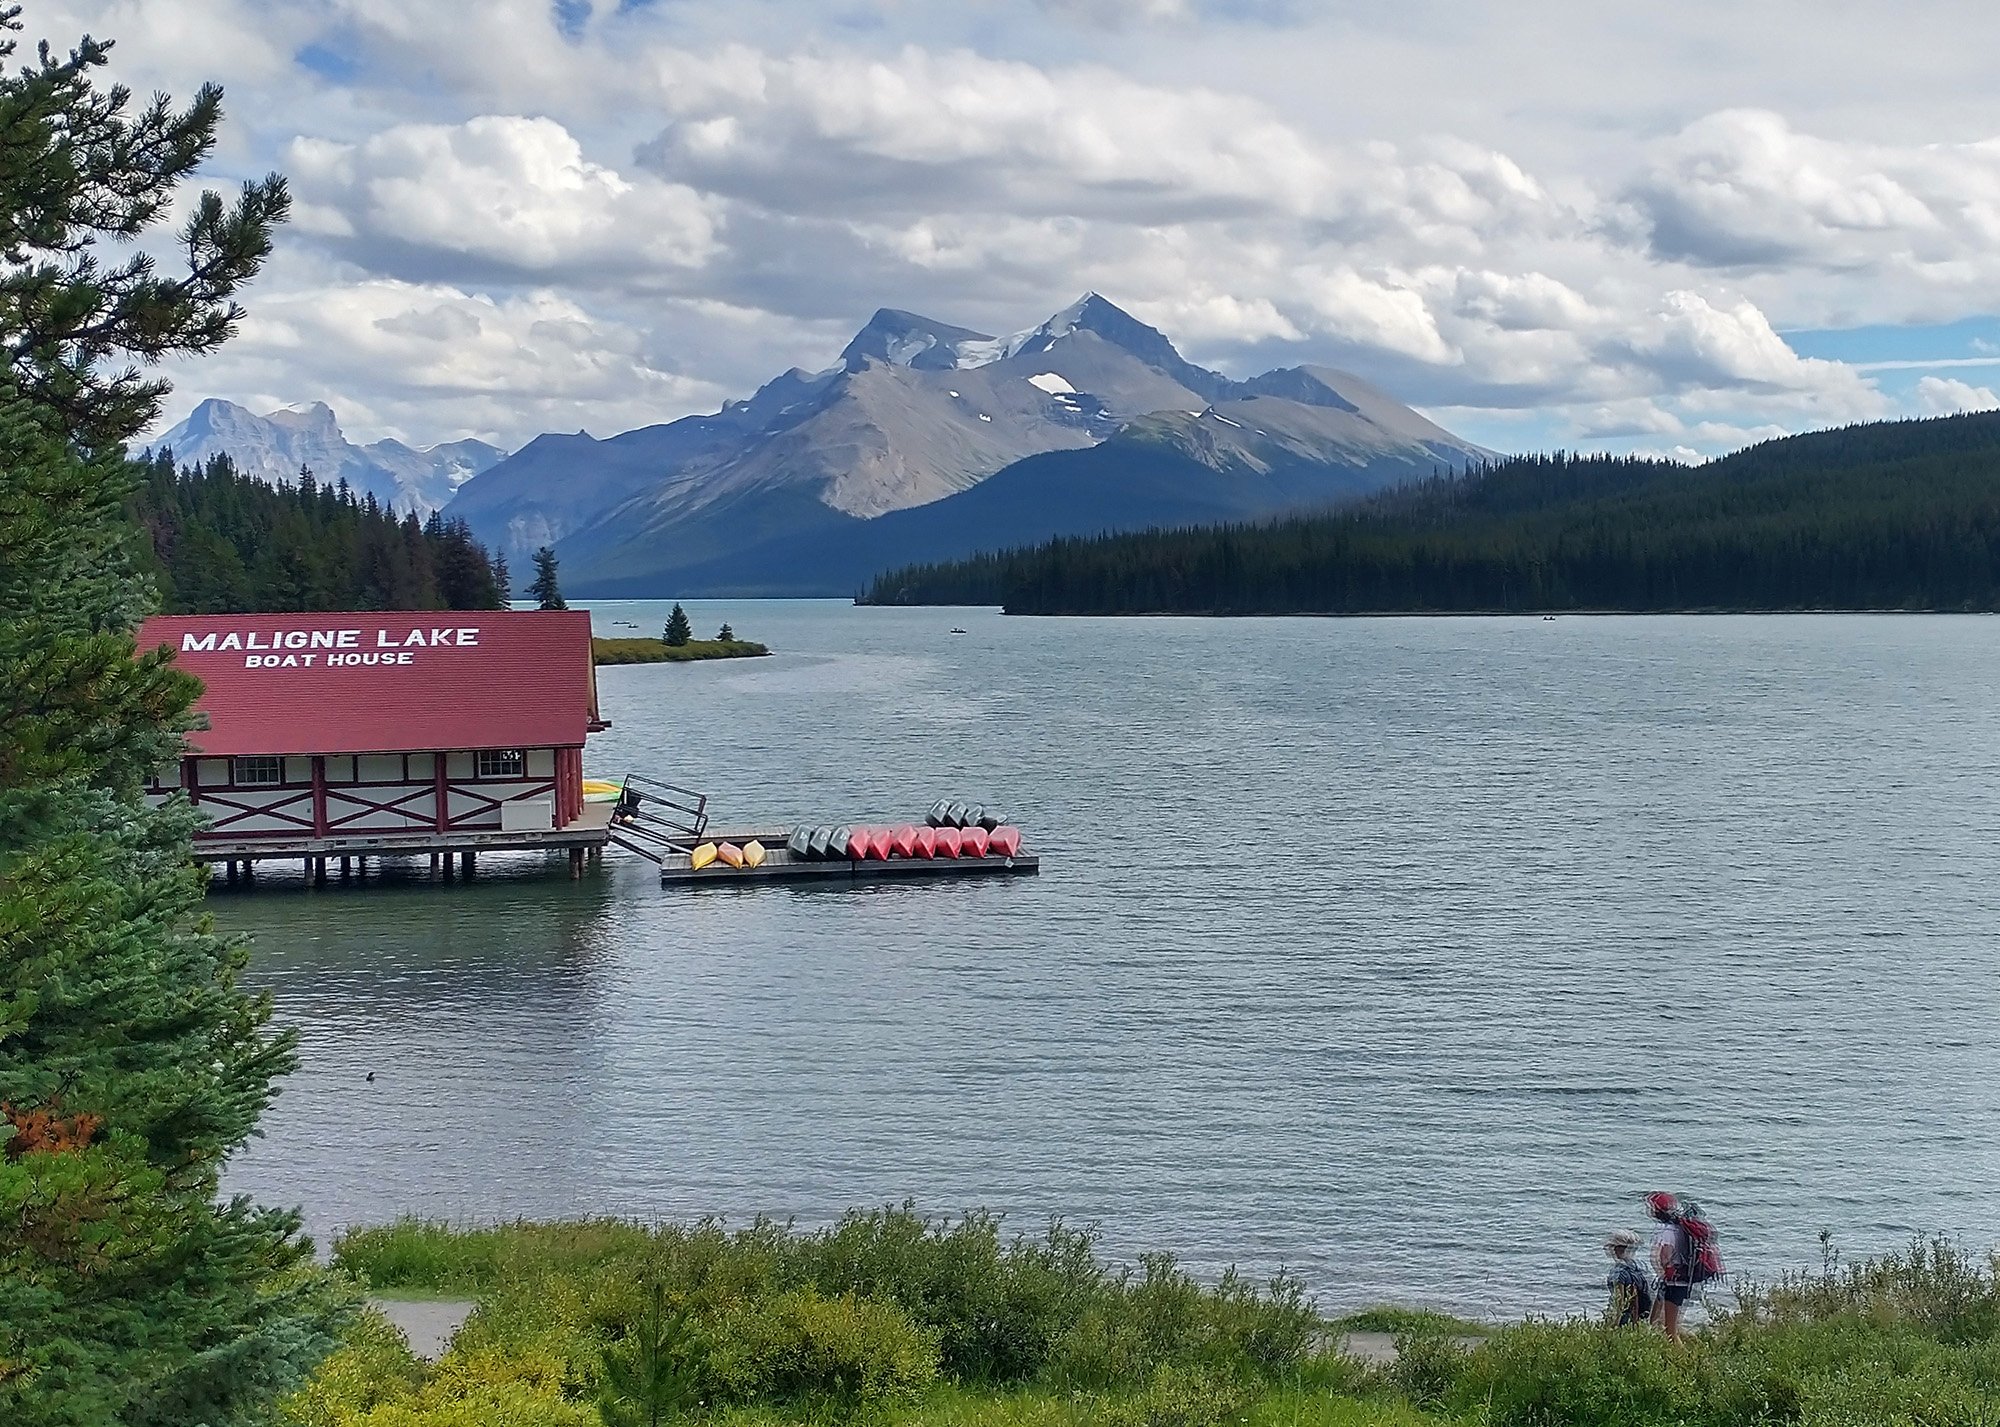 After almost 50km of climbing up, you reach Maligne lake!